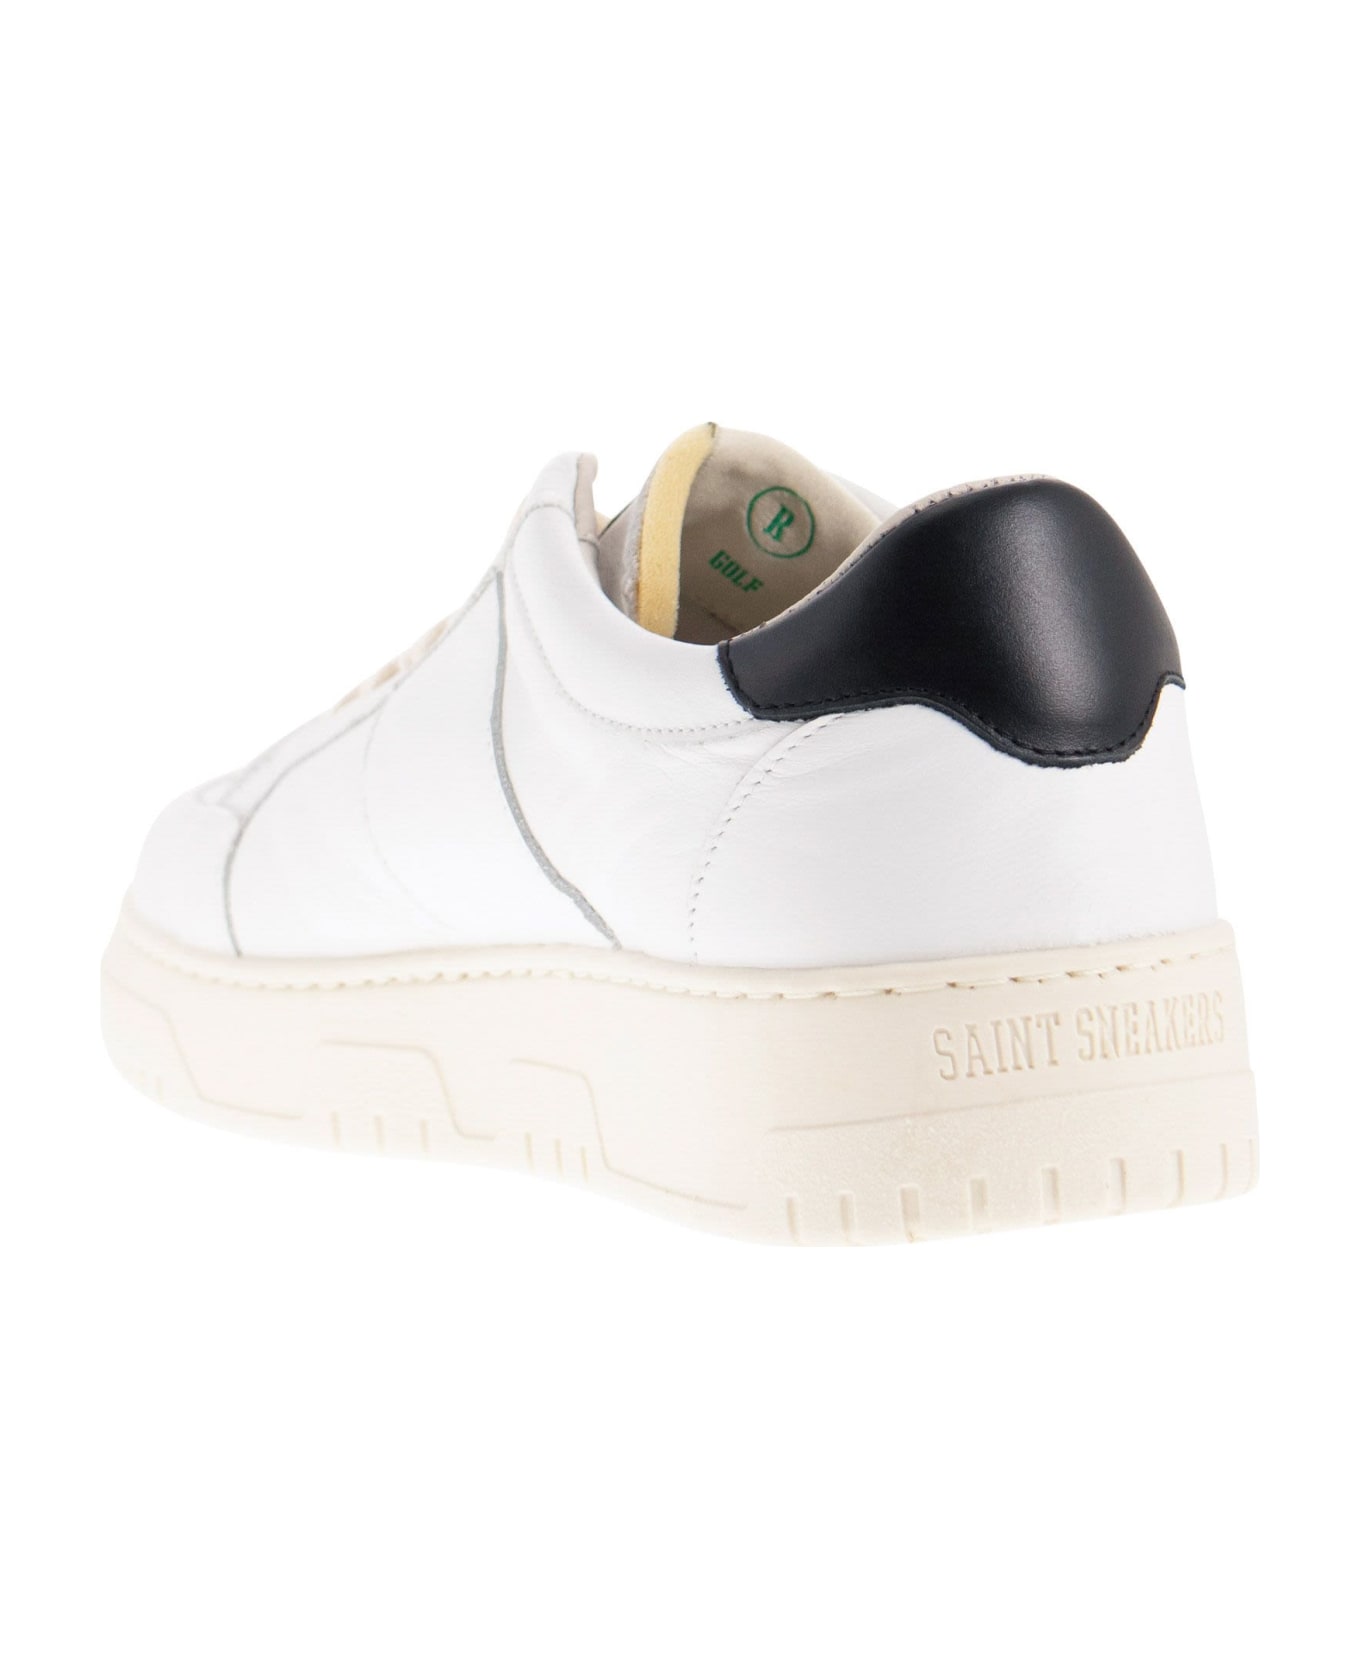 Saint Sneakers Golf - Black And White Trainers - Black